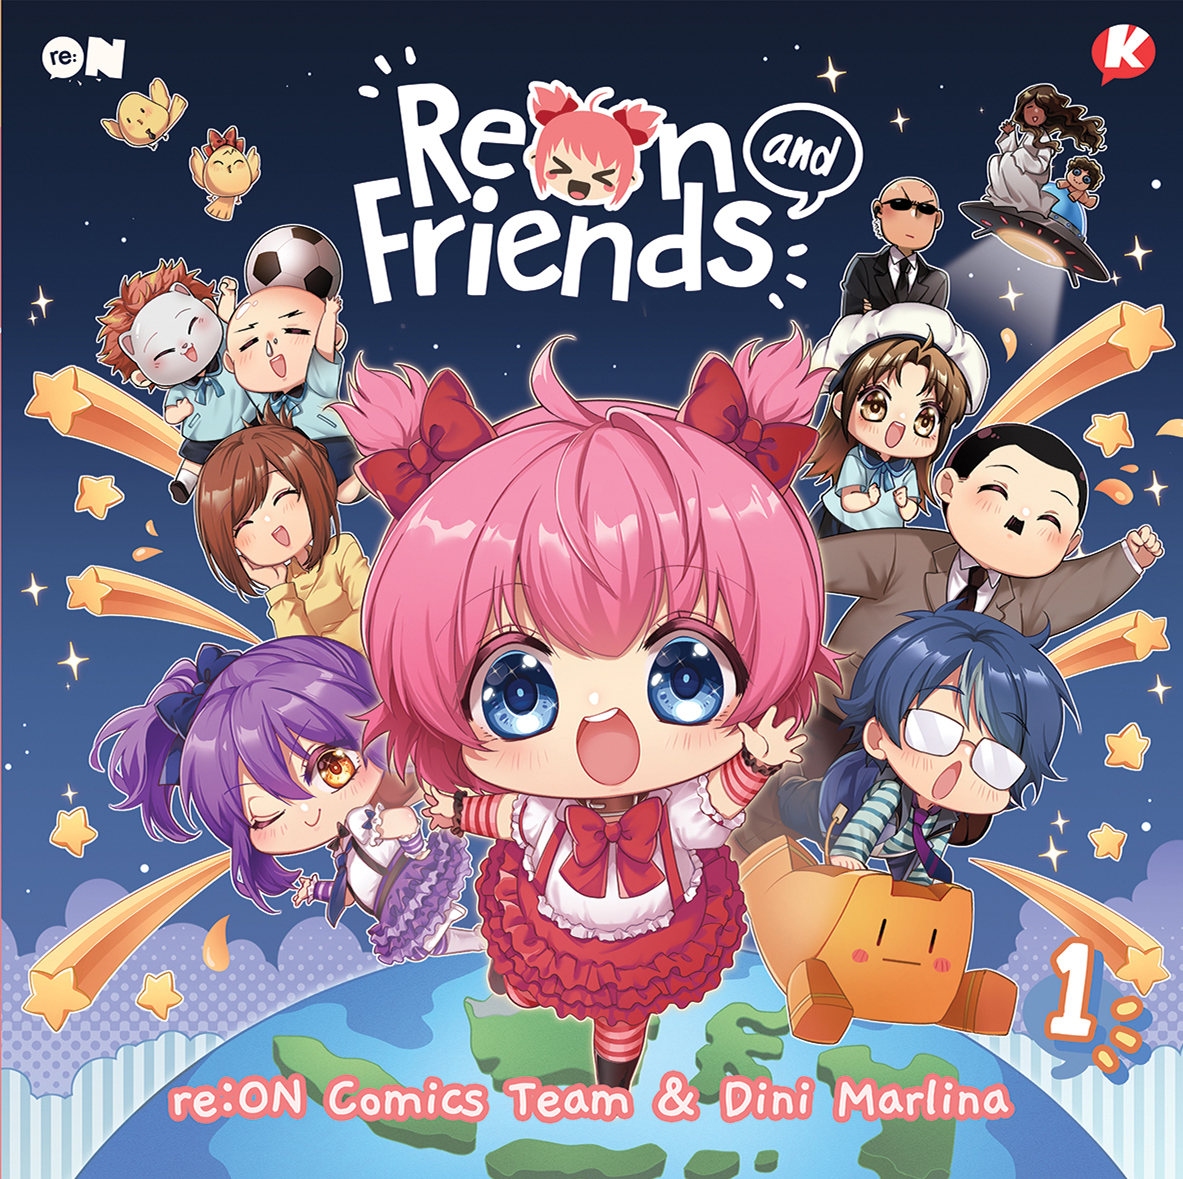 Reon and friends vo. 1